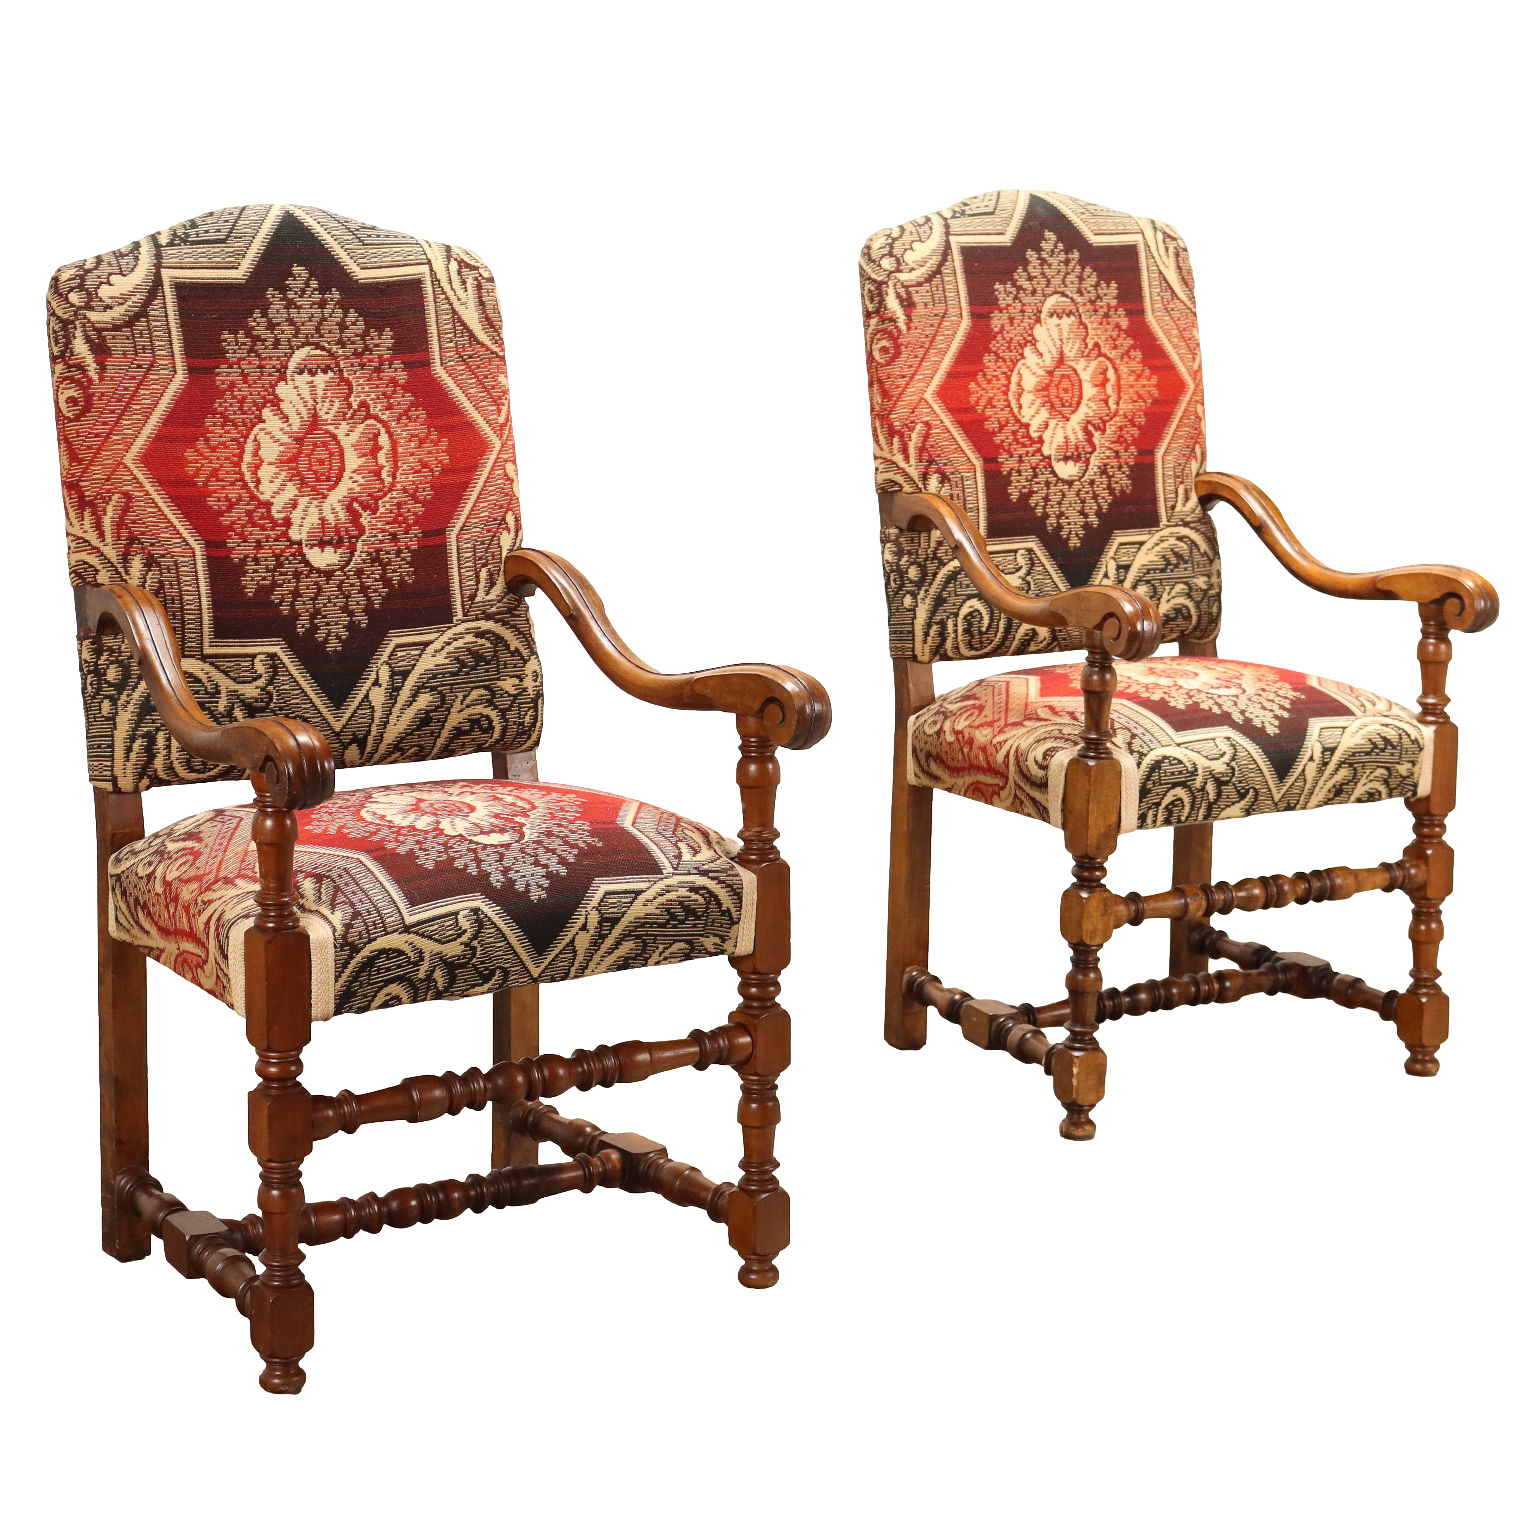 Antique Louis Philippe Mahogany Armchairs, Set of 2 for sale at Pamono